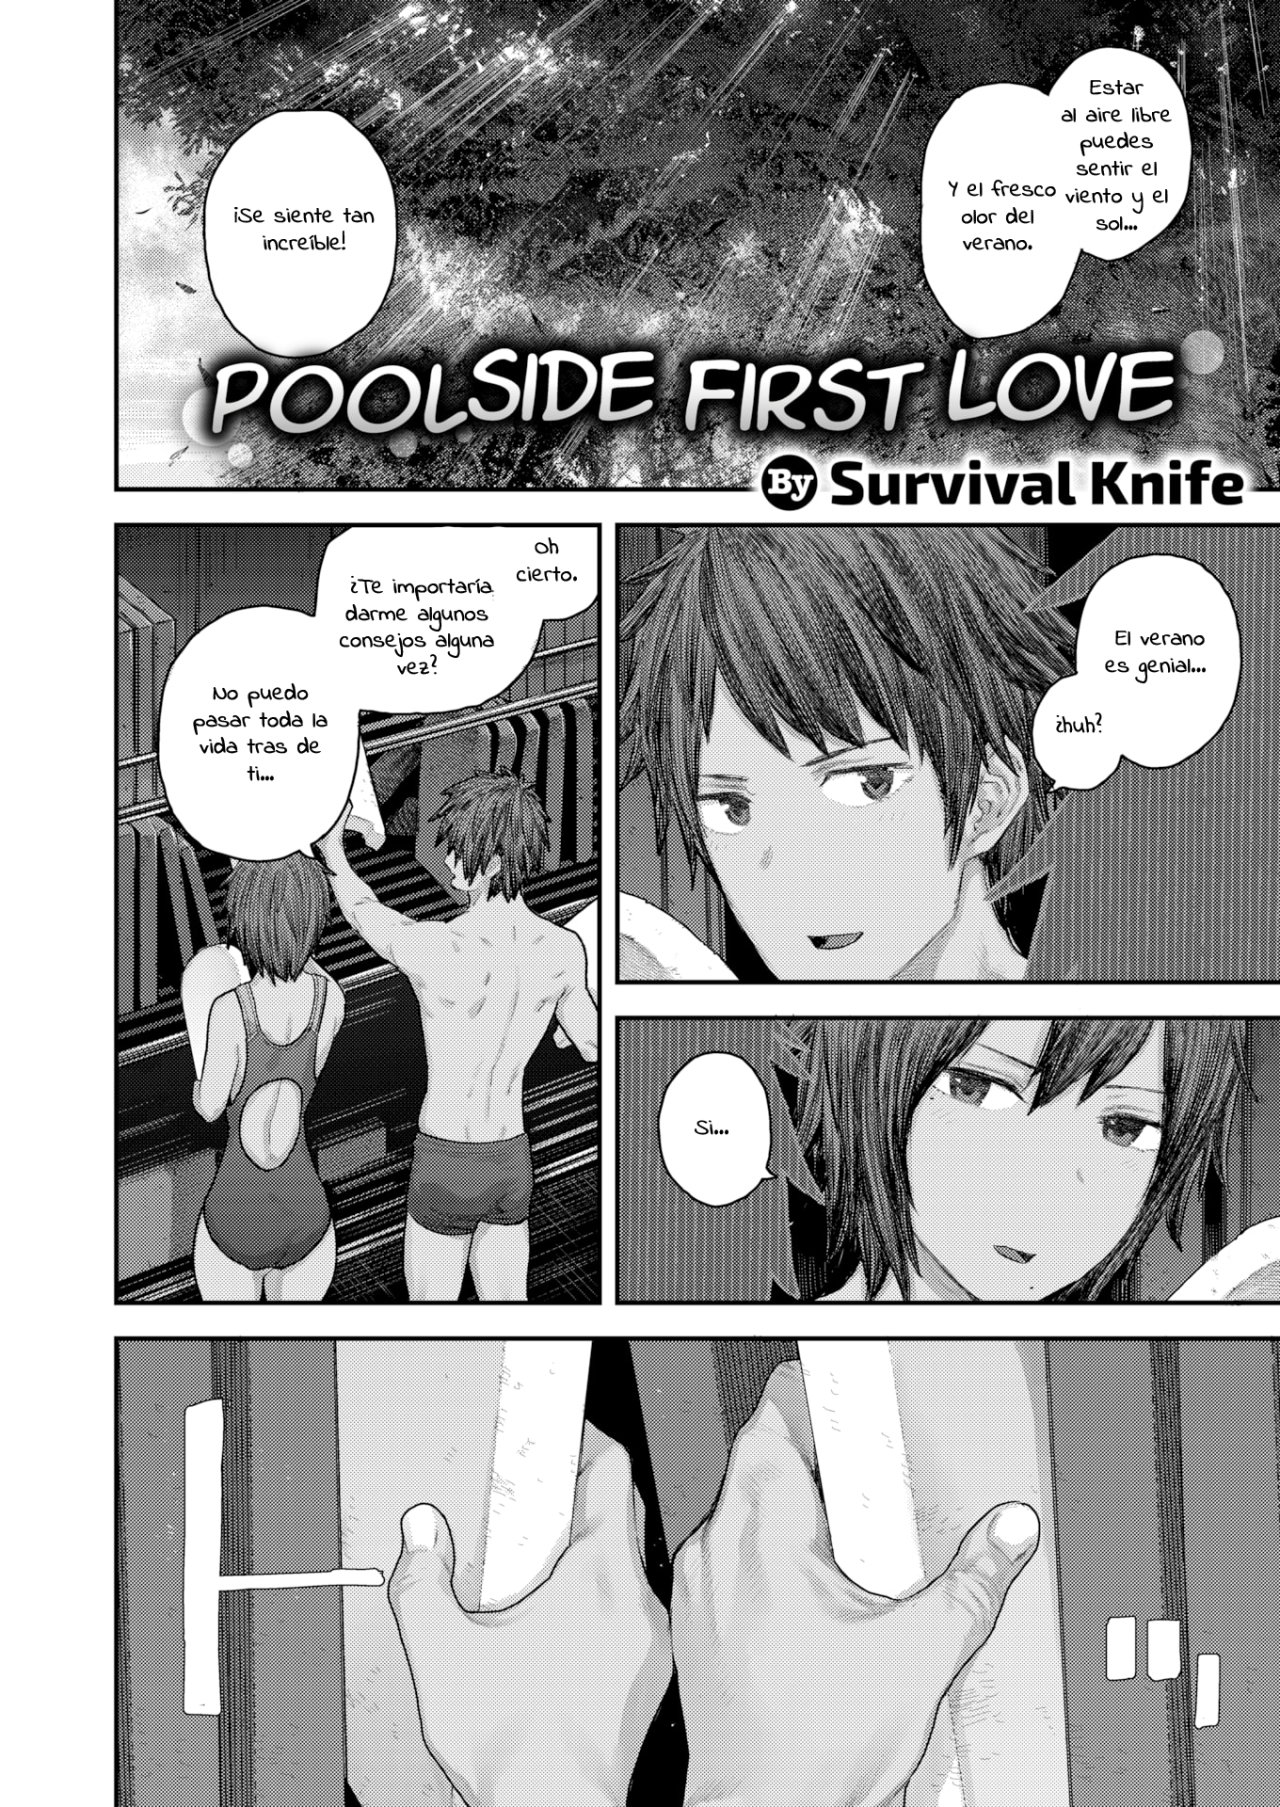 Poolside First Love - 1